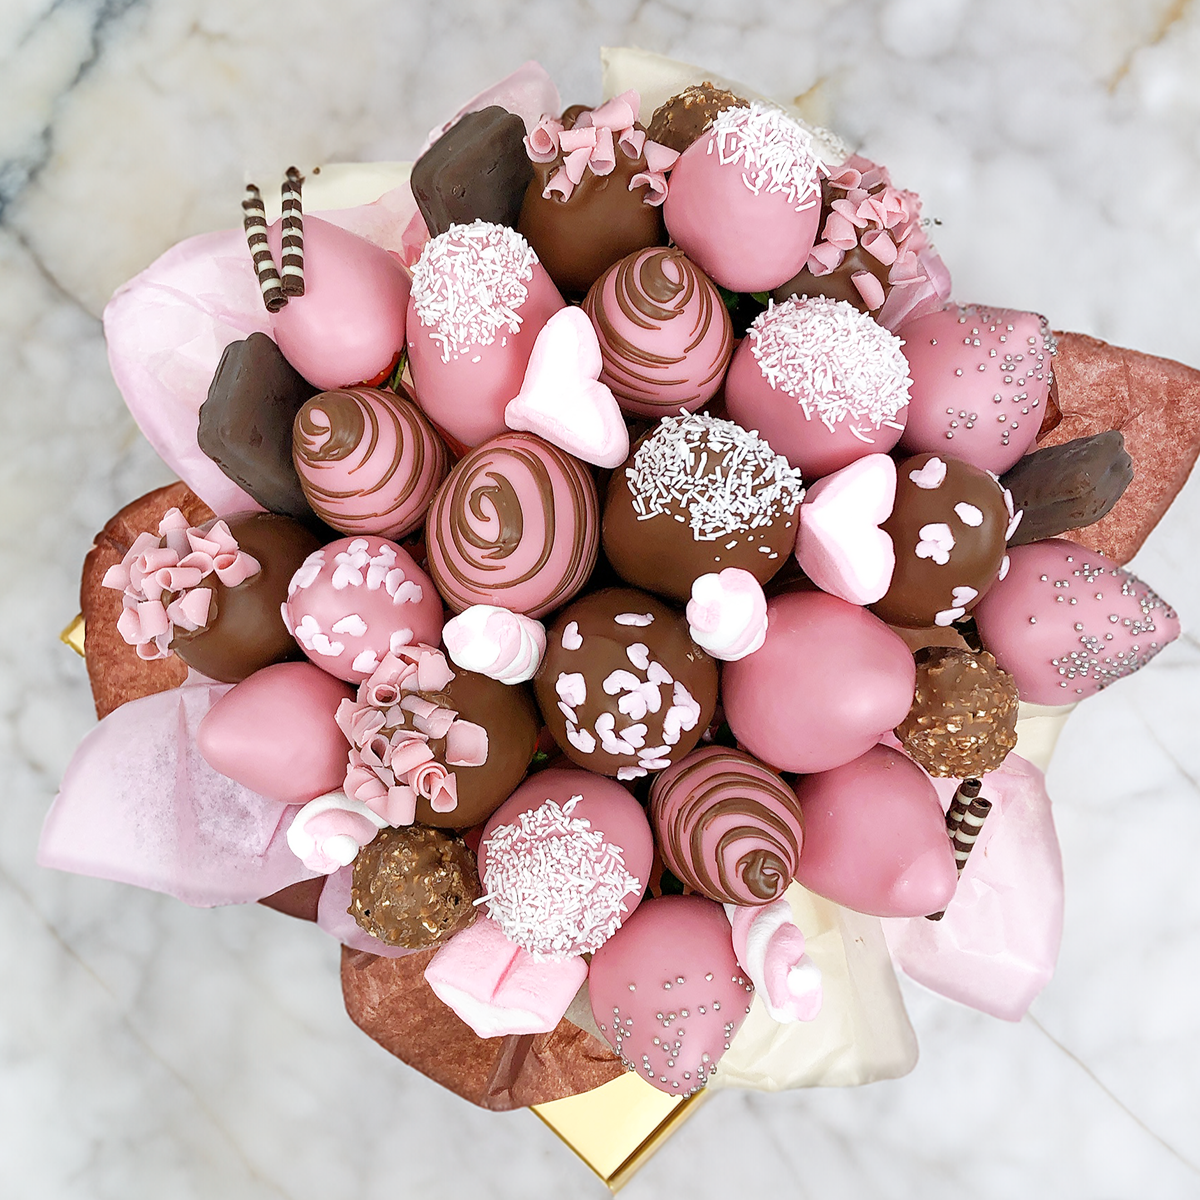 pink chocolate gift, strawberry dipped in chocolate, gift for her